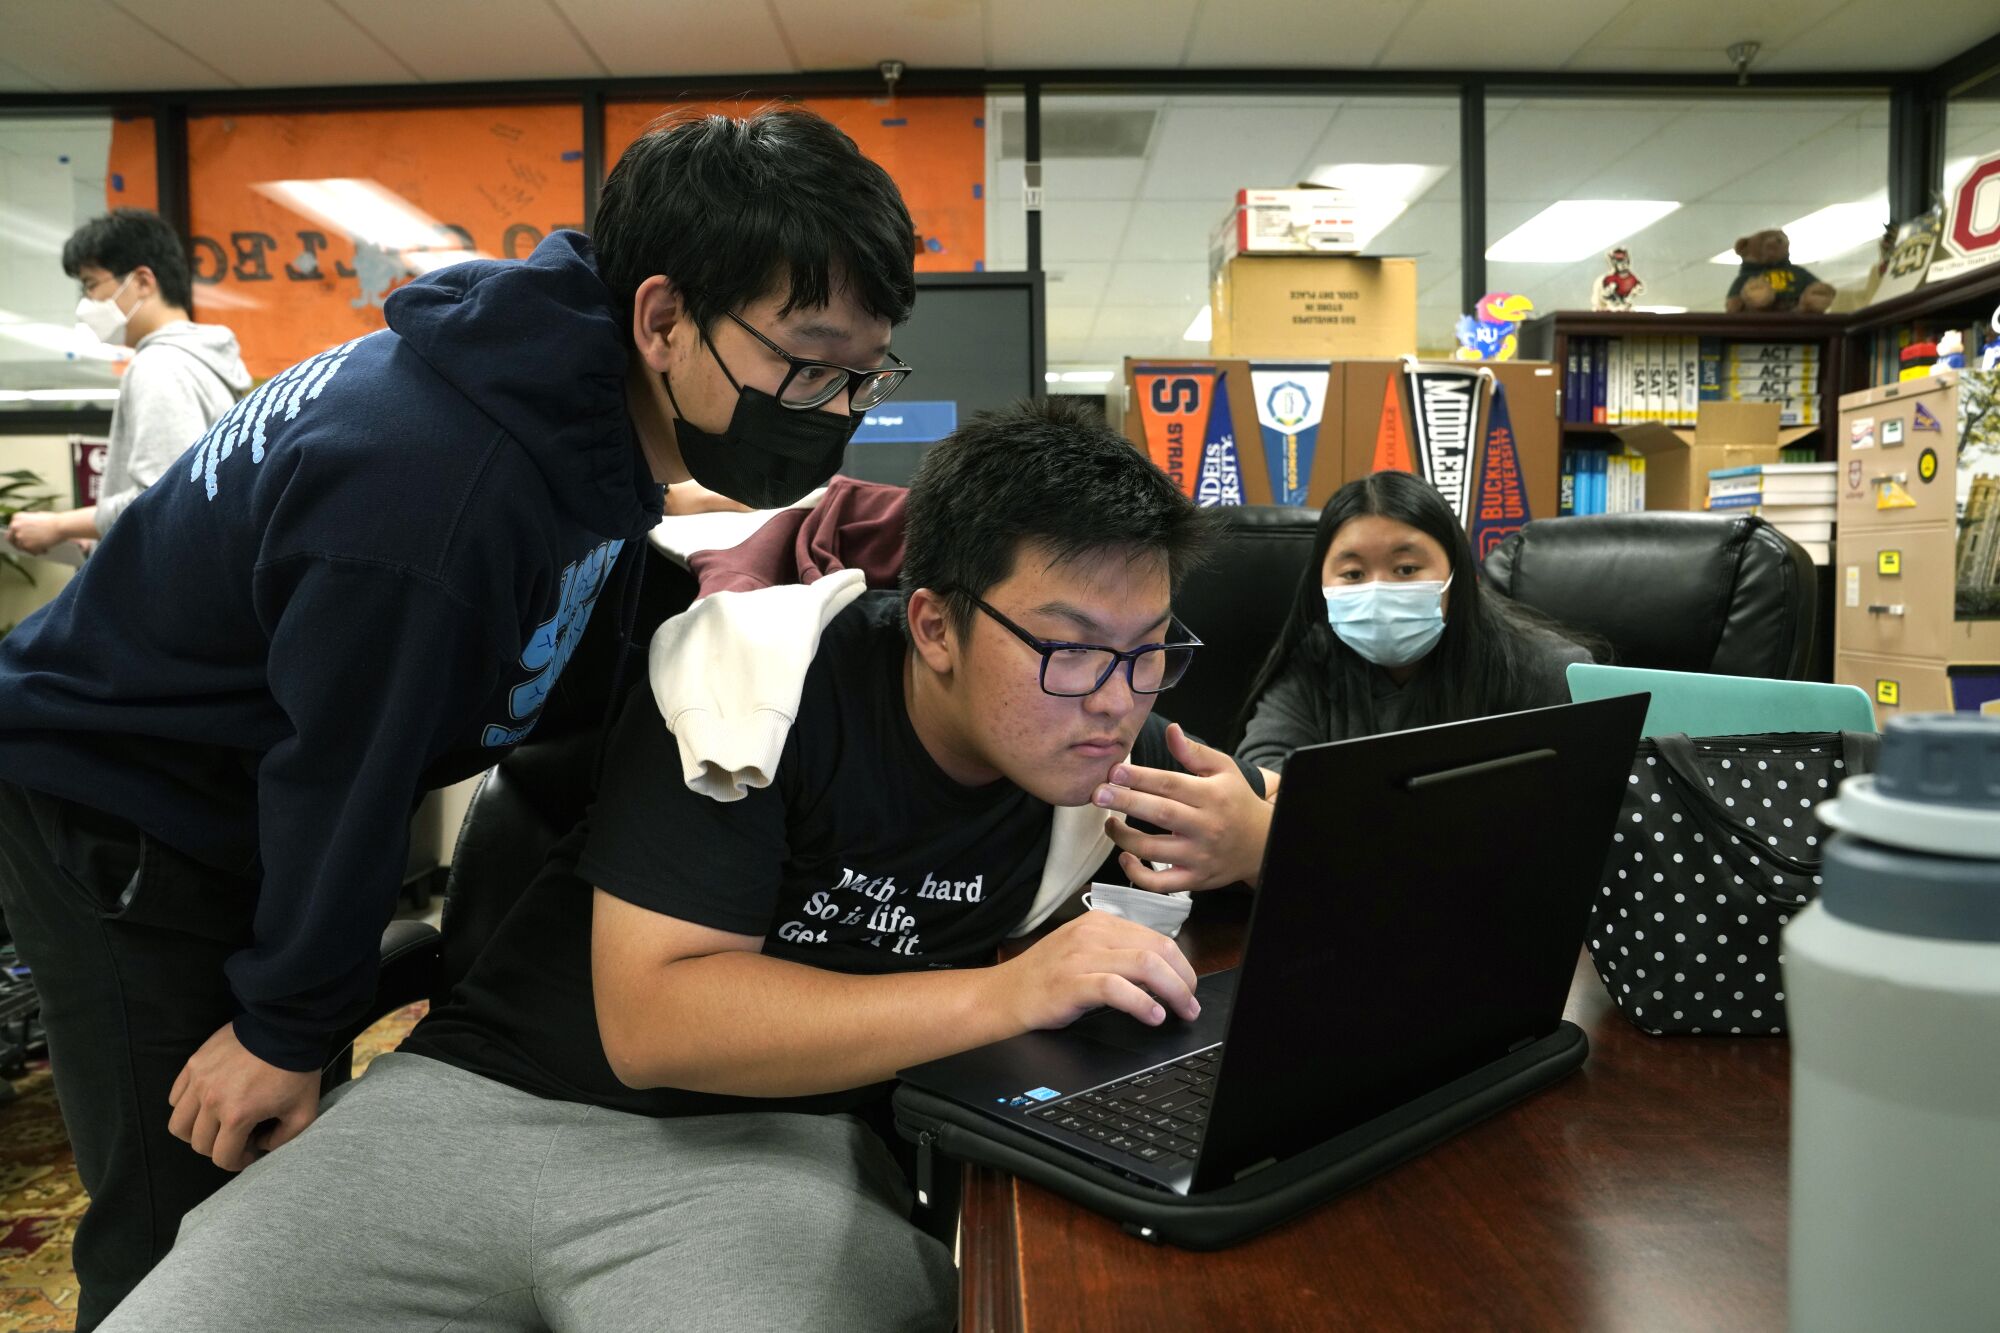 Three students huddle around a laptop in a room